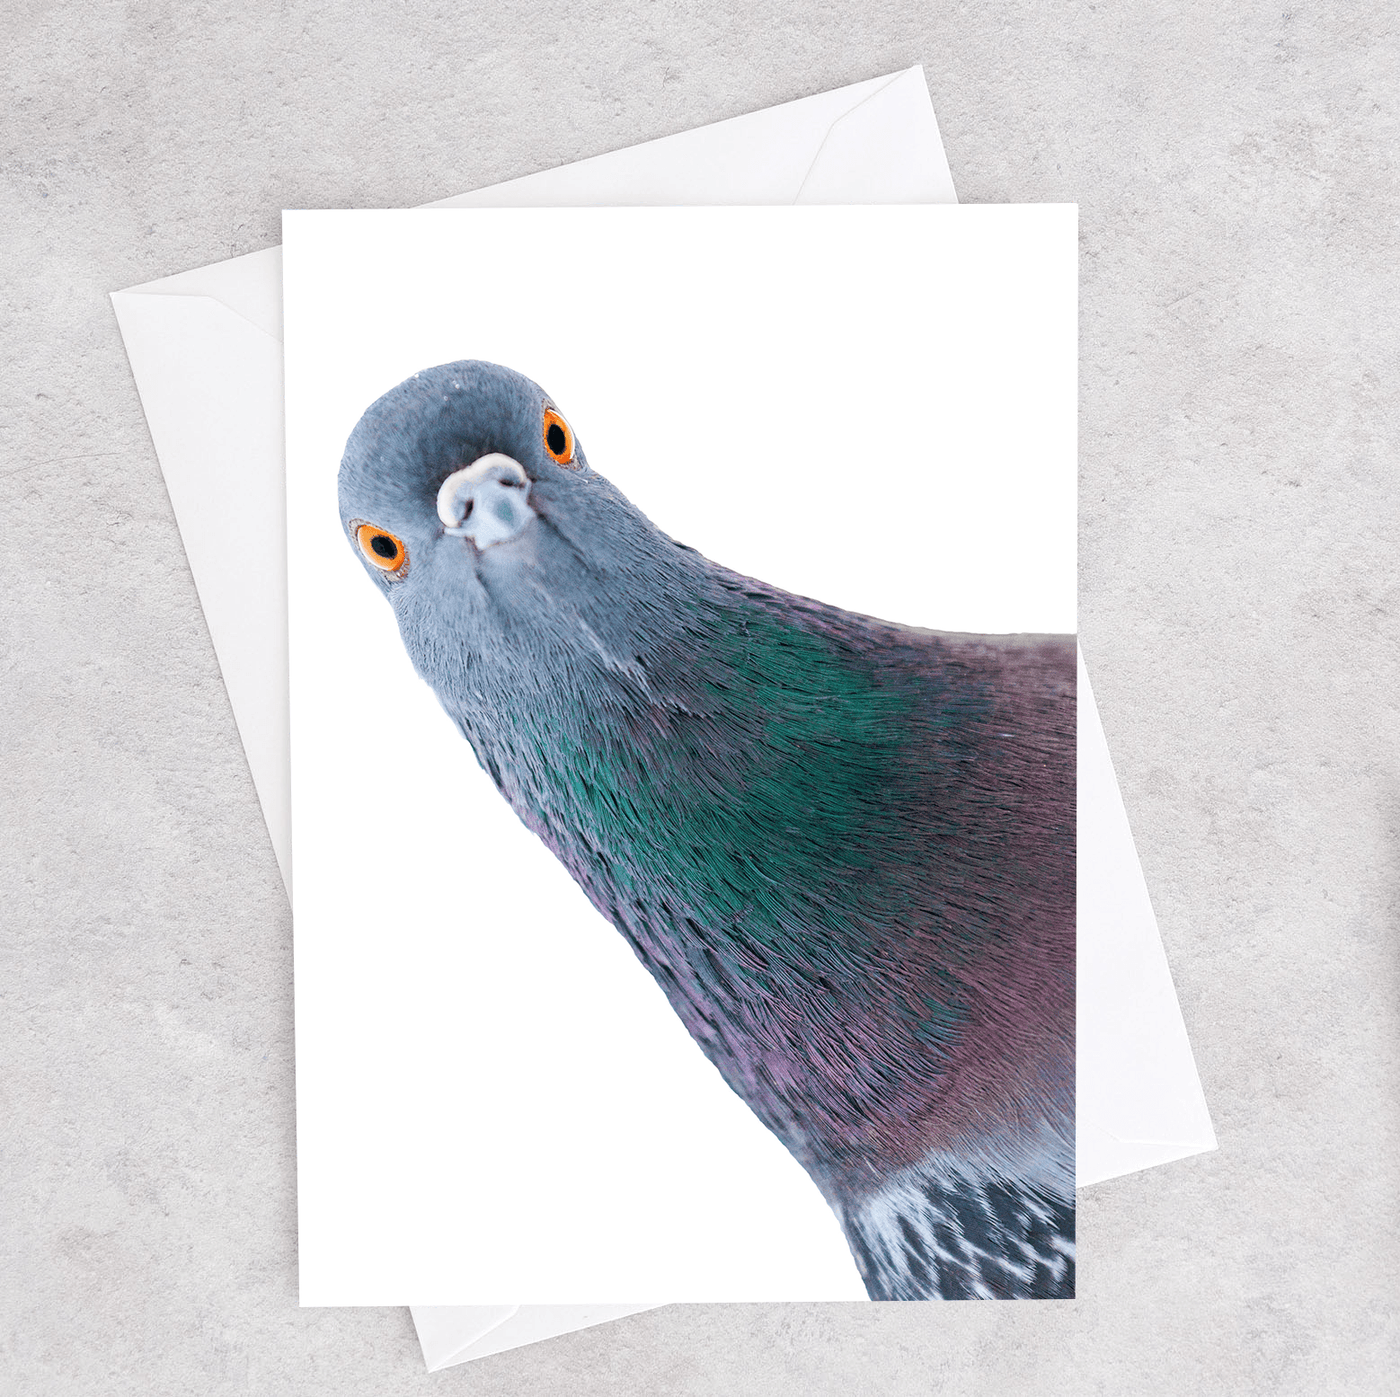 This greeting card has an image of a pigeon looking at the viewer